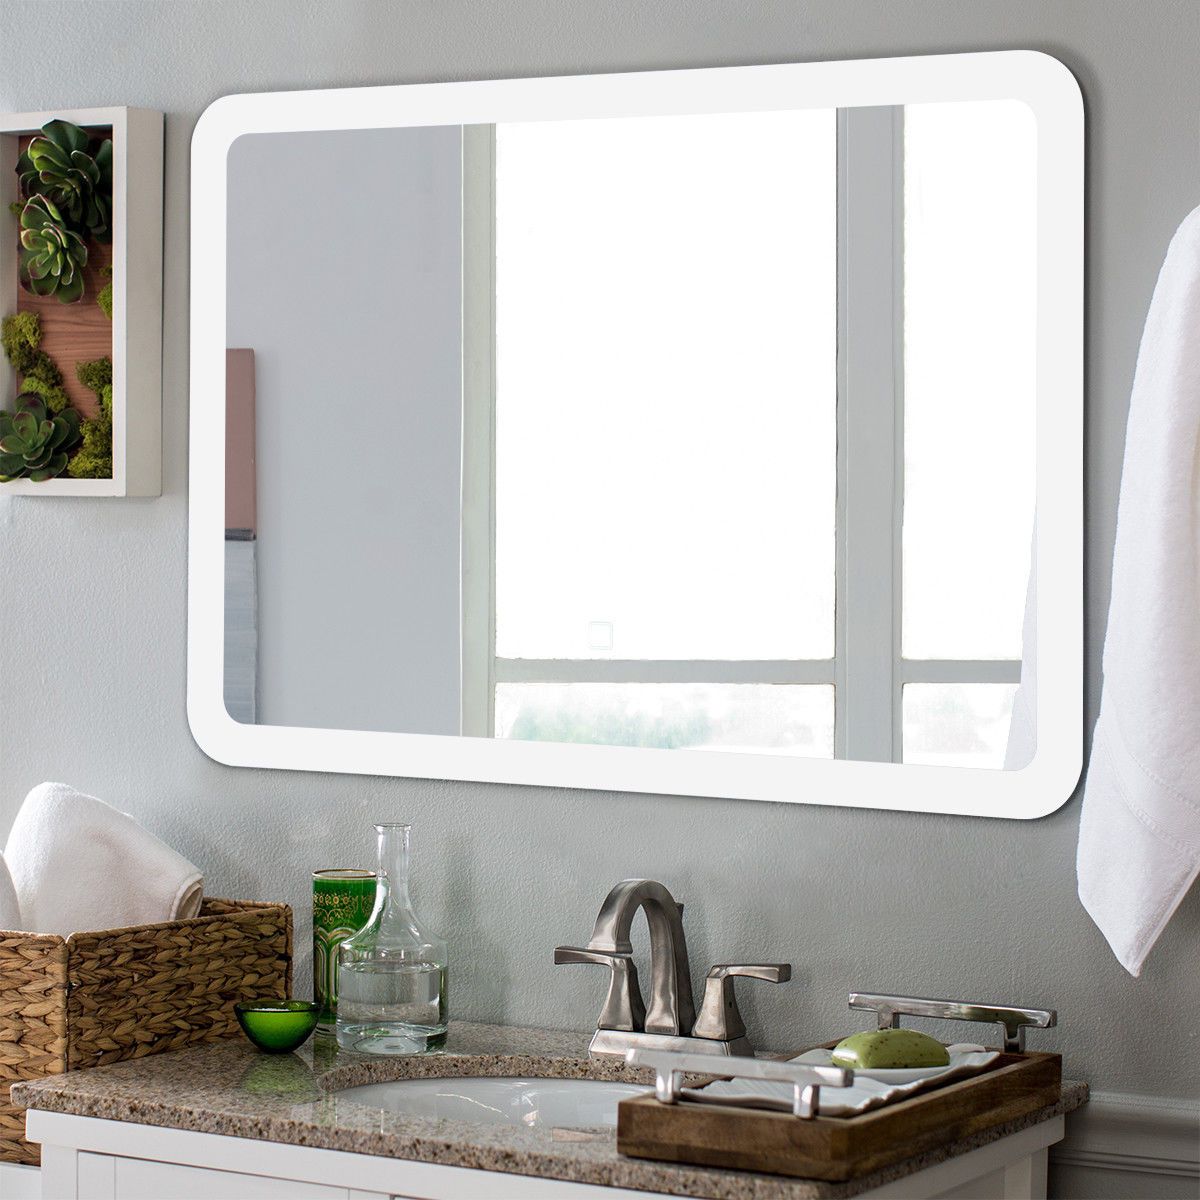 Costway Led Wall Mounted Mirror Bathroom Makeup Illuminated Rounded Arc With Regard To Cut Corner Wall Mirrors (View 5 of 15)